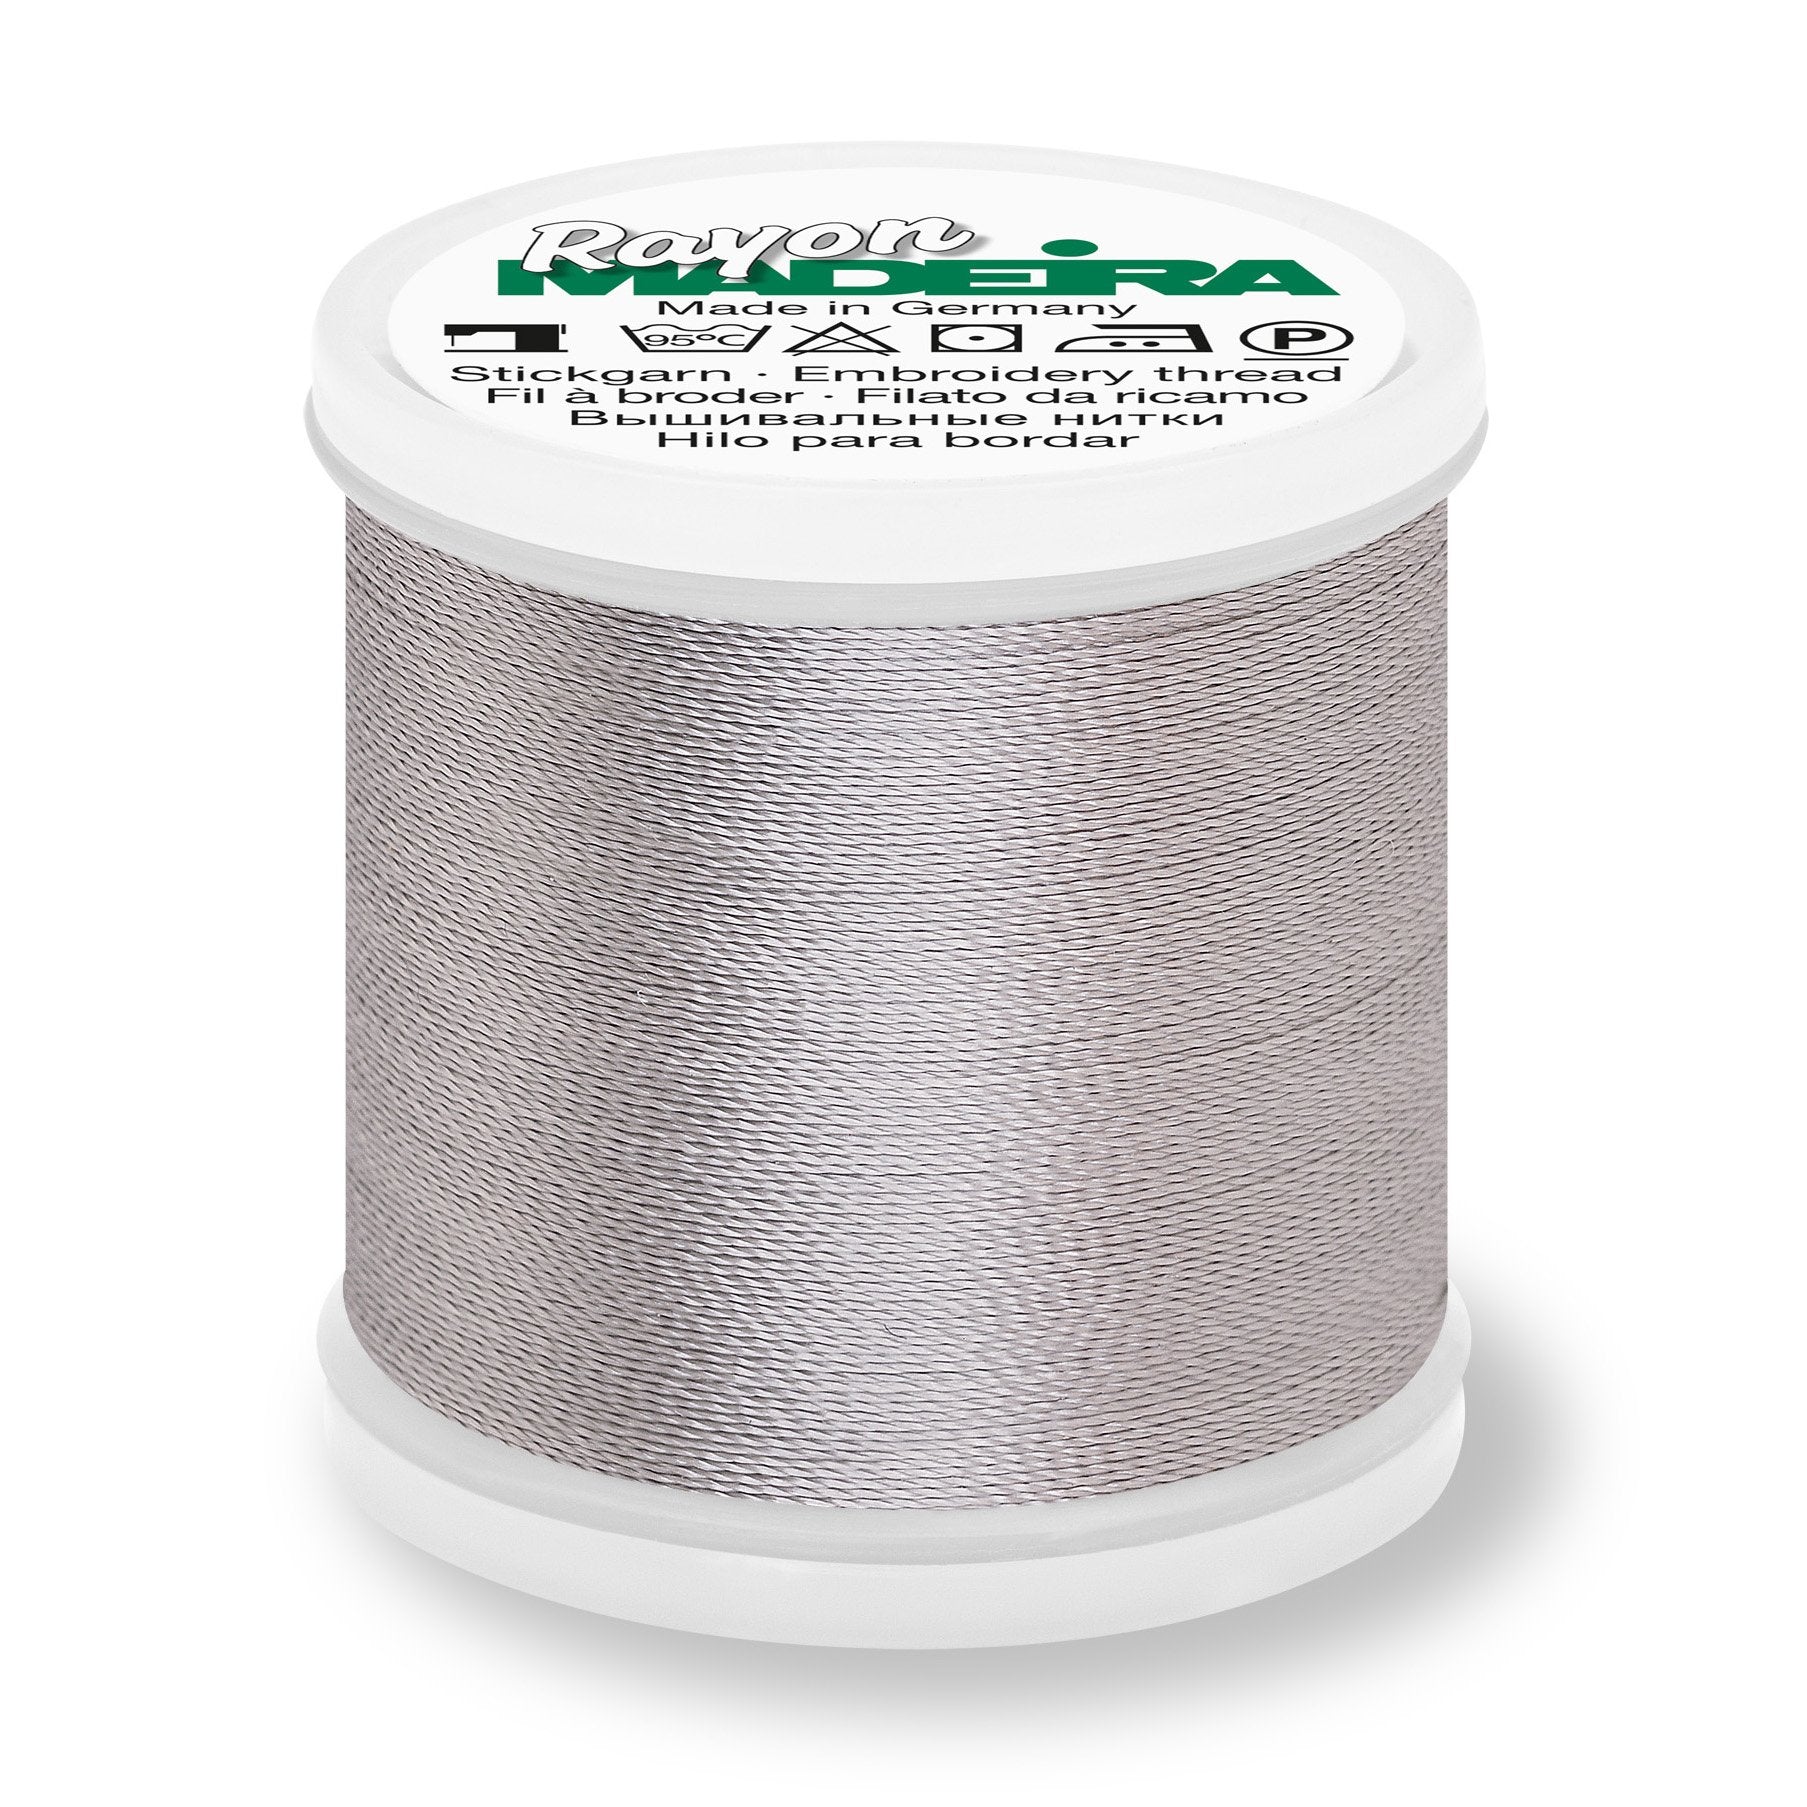 Madeira Rayon 40 Embroidery Thread 200m #1012 Dark Whisper Grey from Jaycotts Sewing Supplies